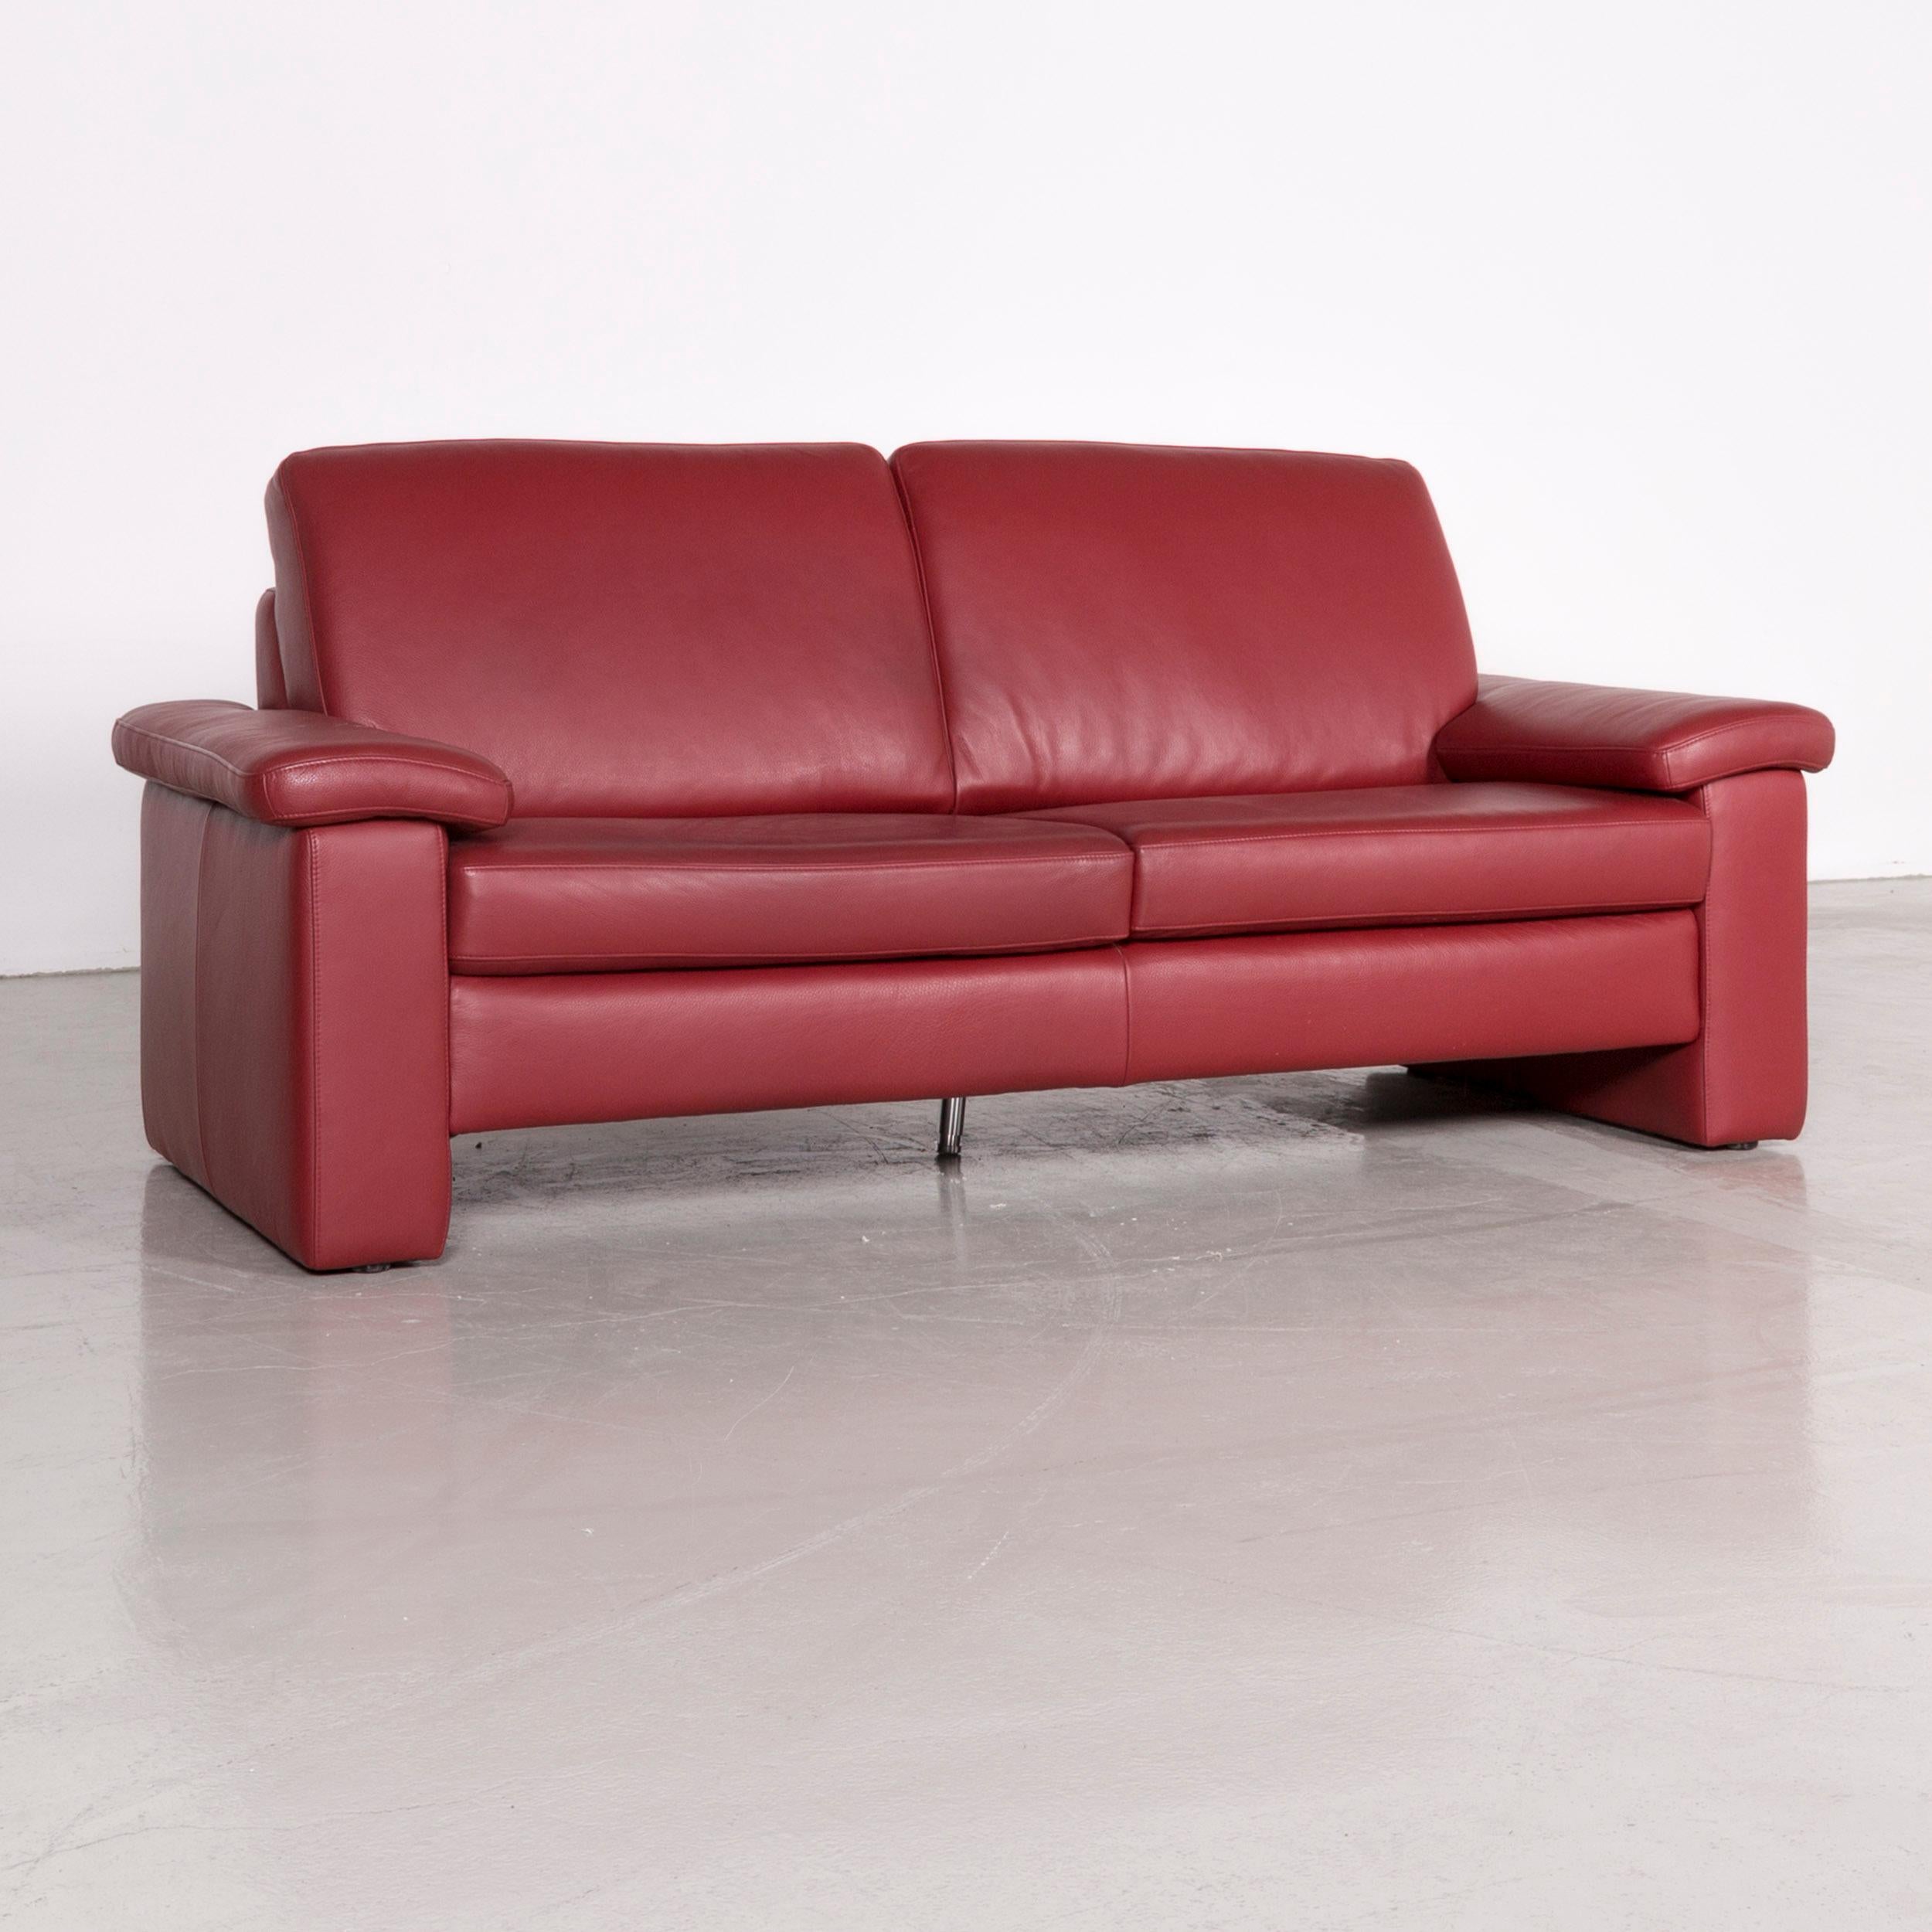 Musterring Designer Leather Sofa Armchair Set Red Three-Seat Couch In Good Condition For Sale In Cologne, DE